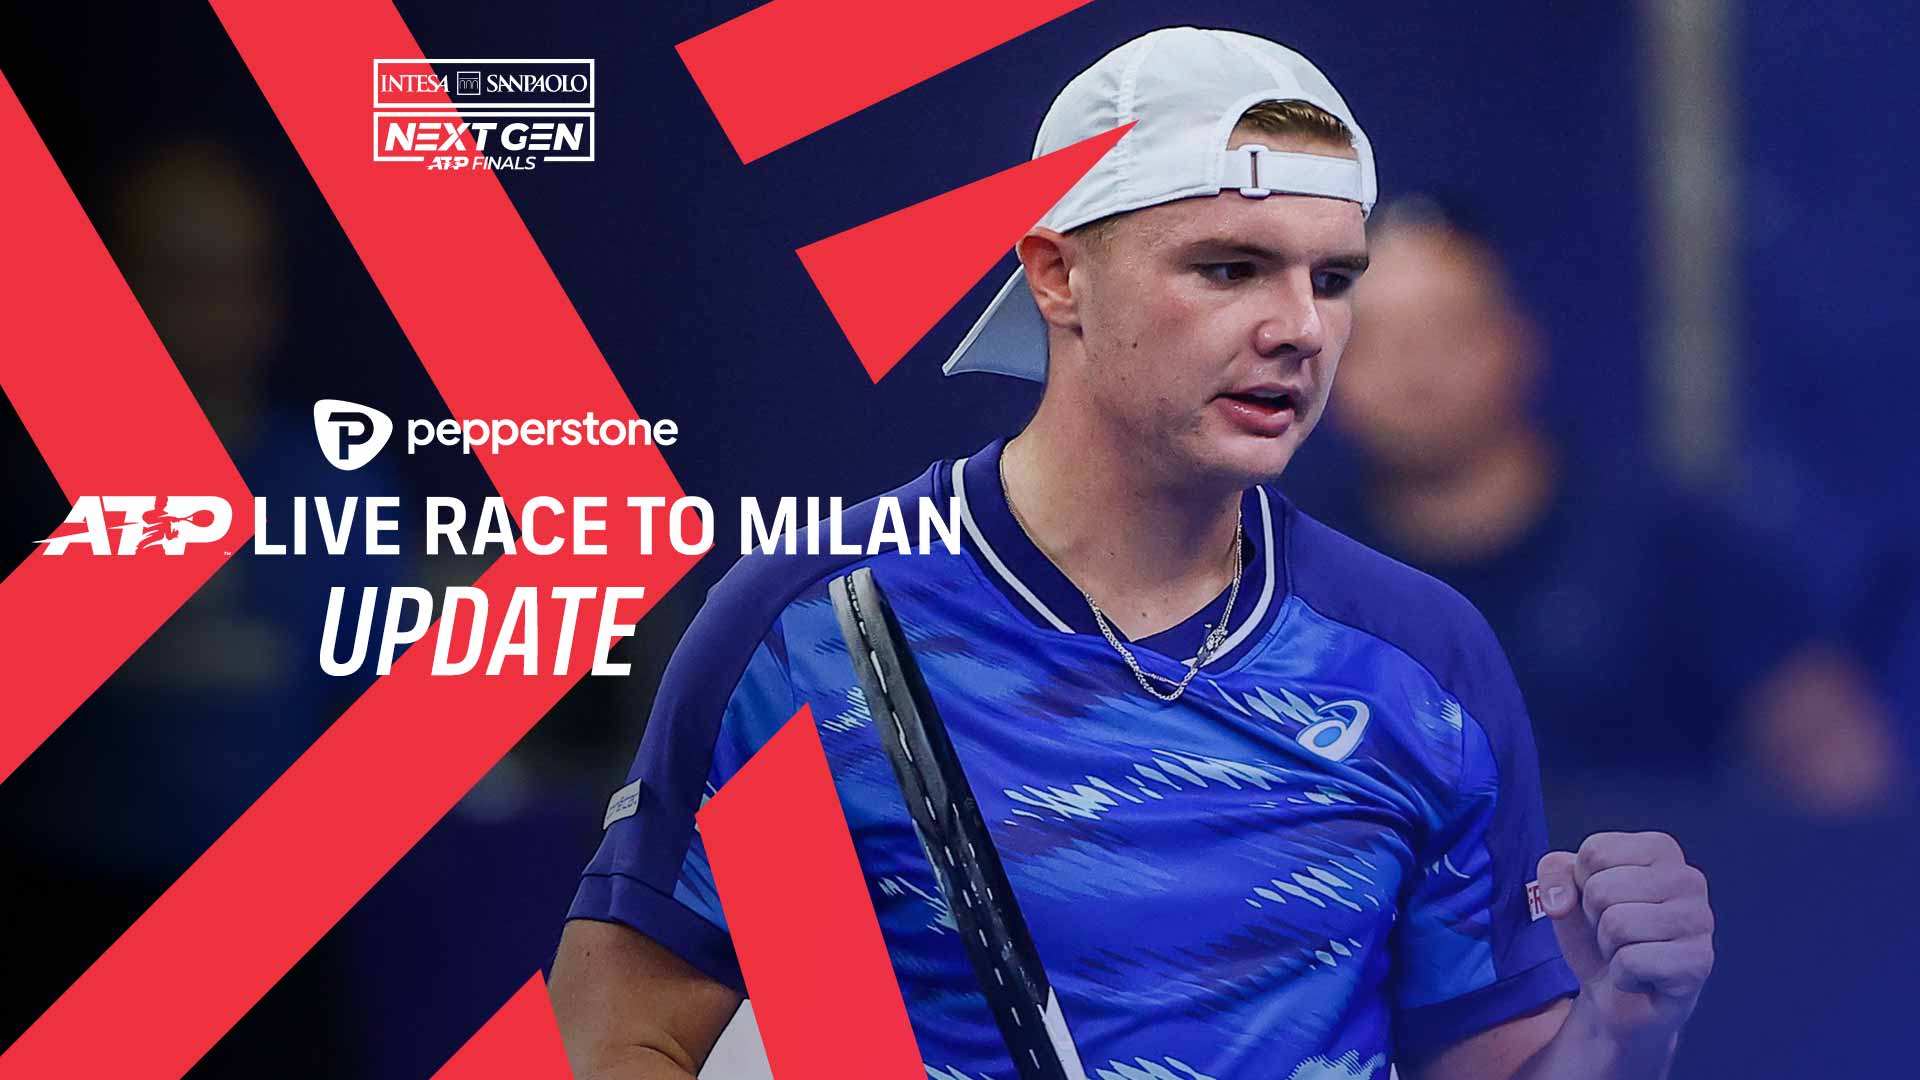 Dominic Stricker is 10th in the Pepperstone ATP Live Race To Milan.